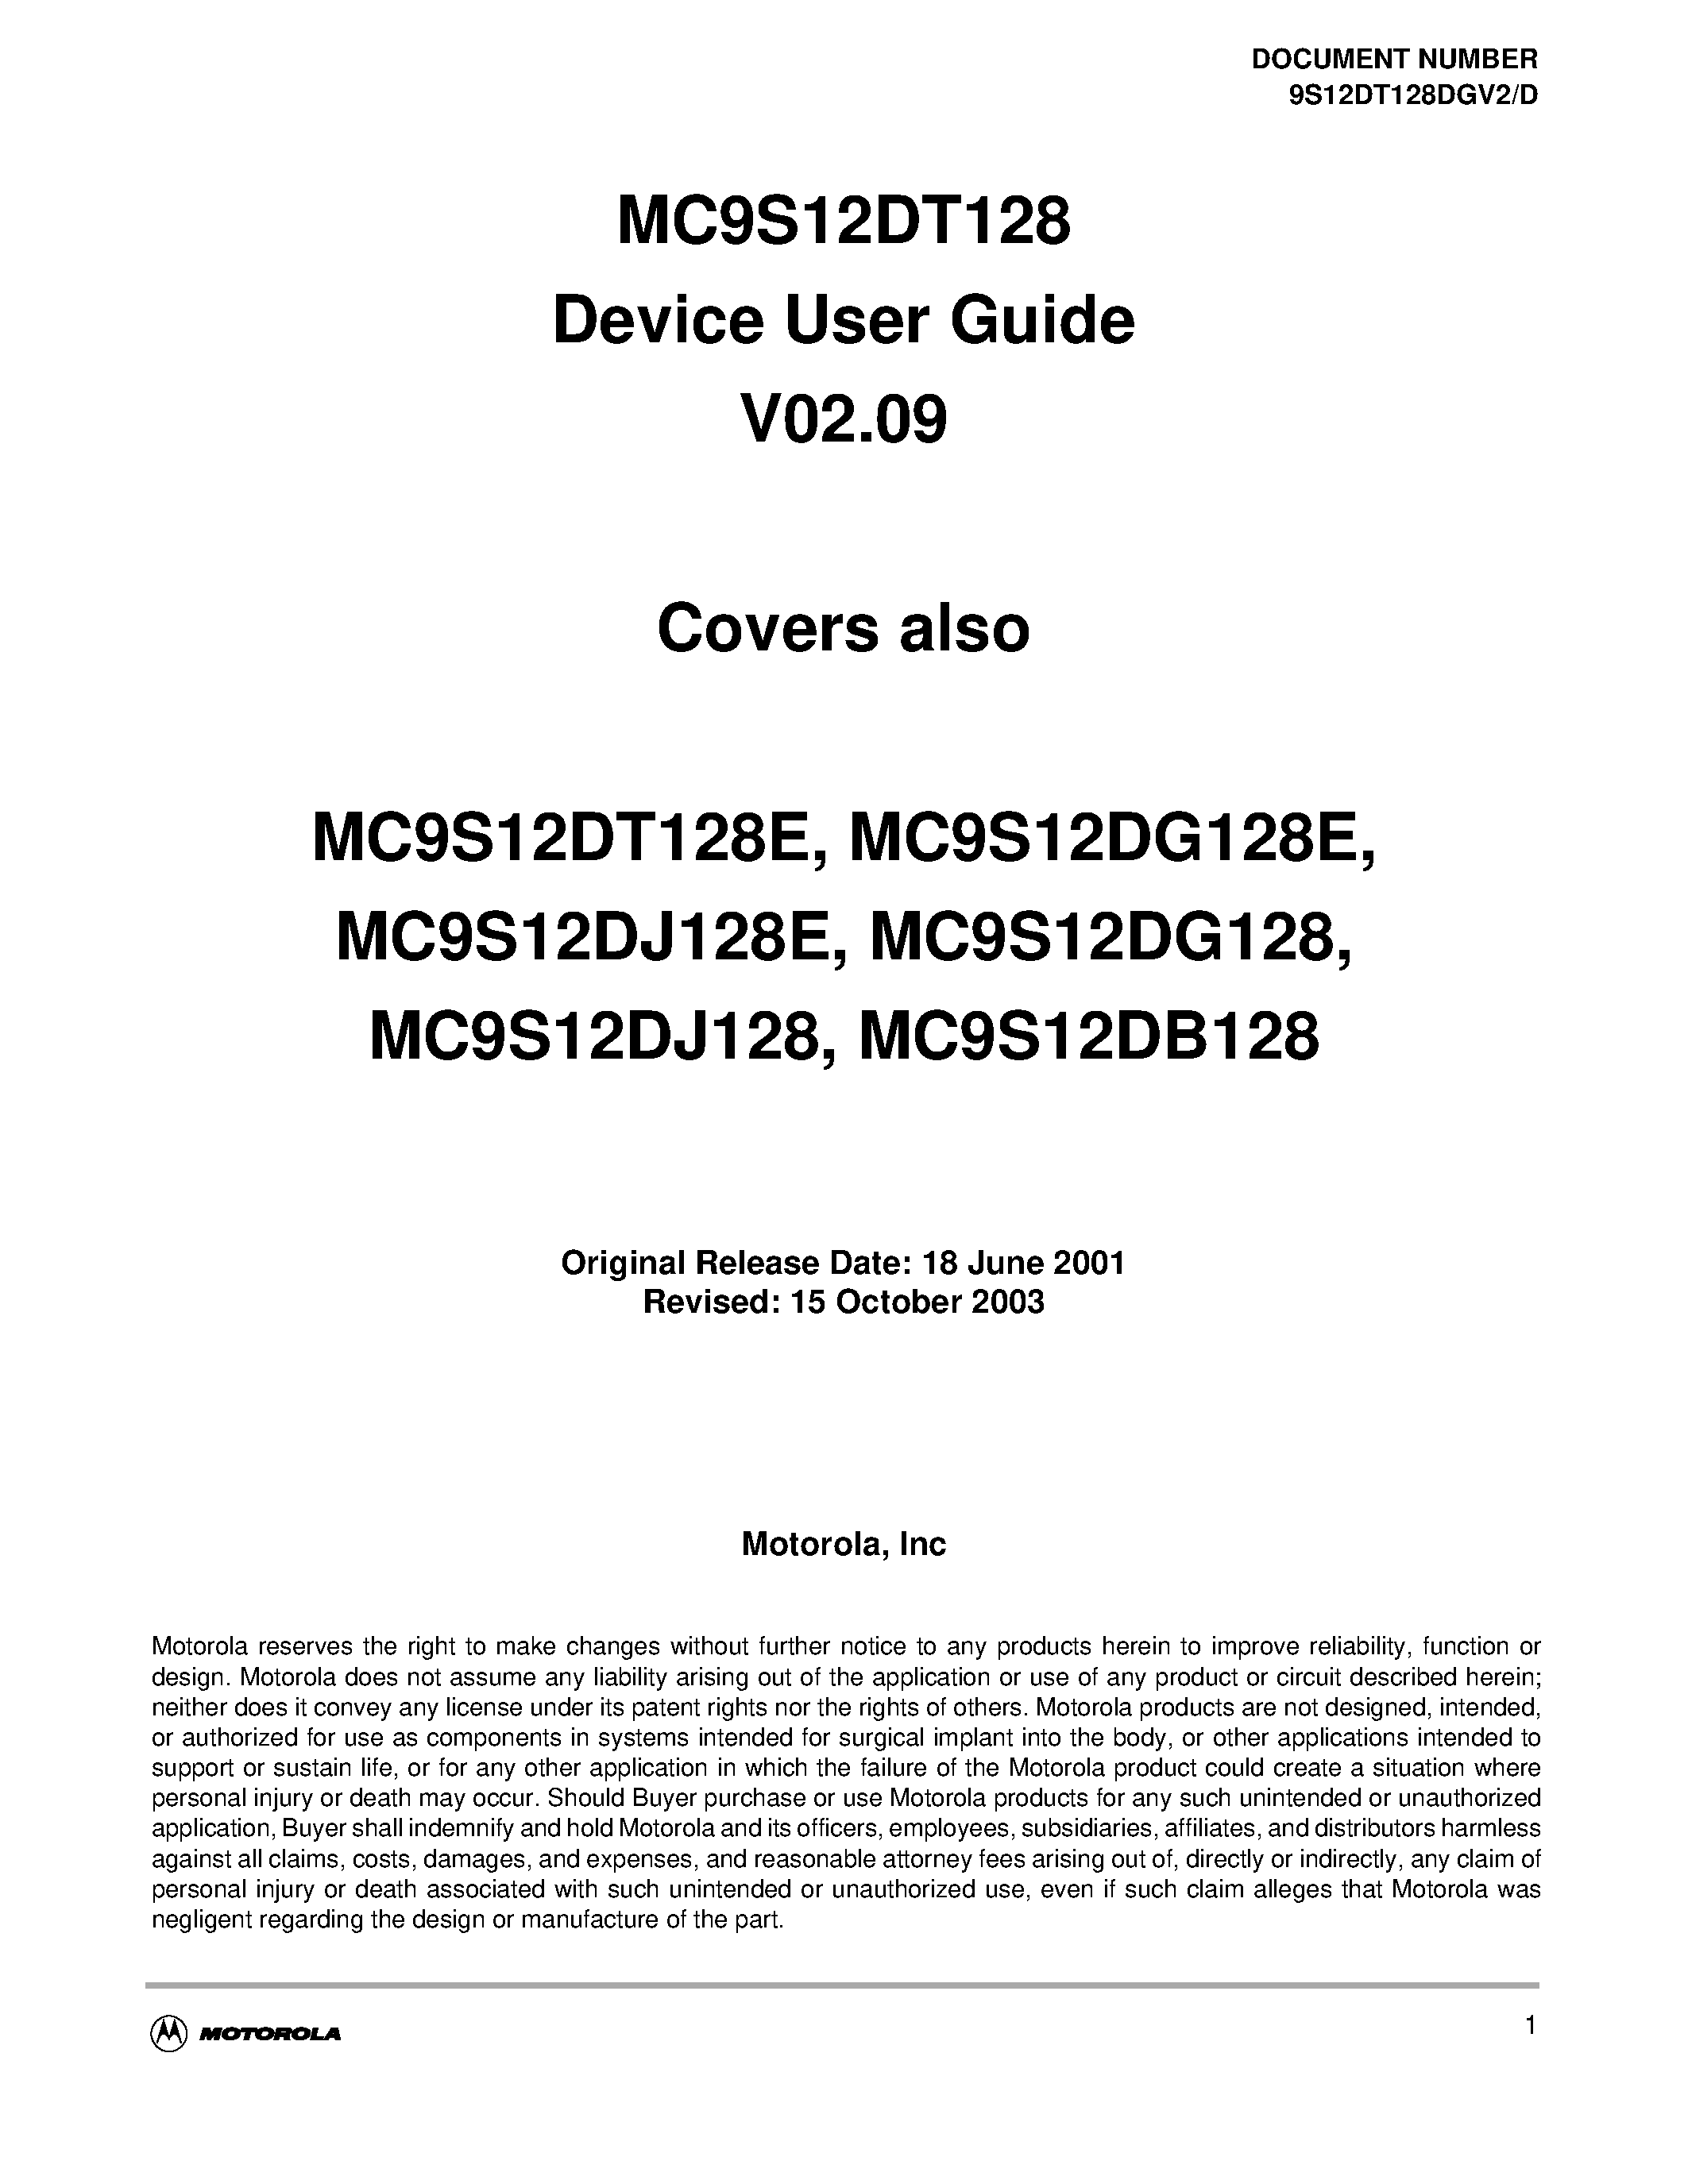 Datasheet S12INTV1 - MC9S12DT128 Device User Guide V02.09 page 1